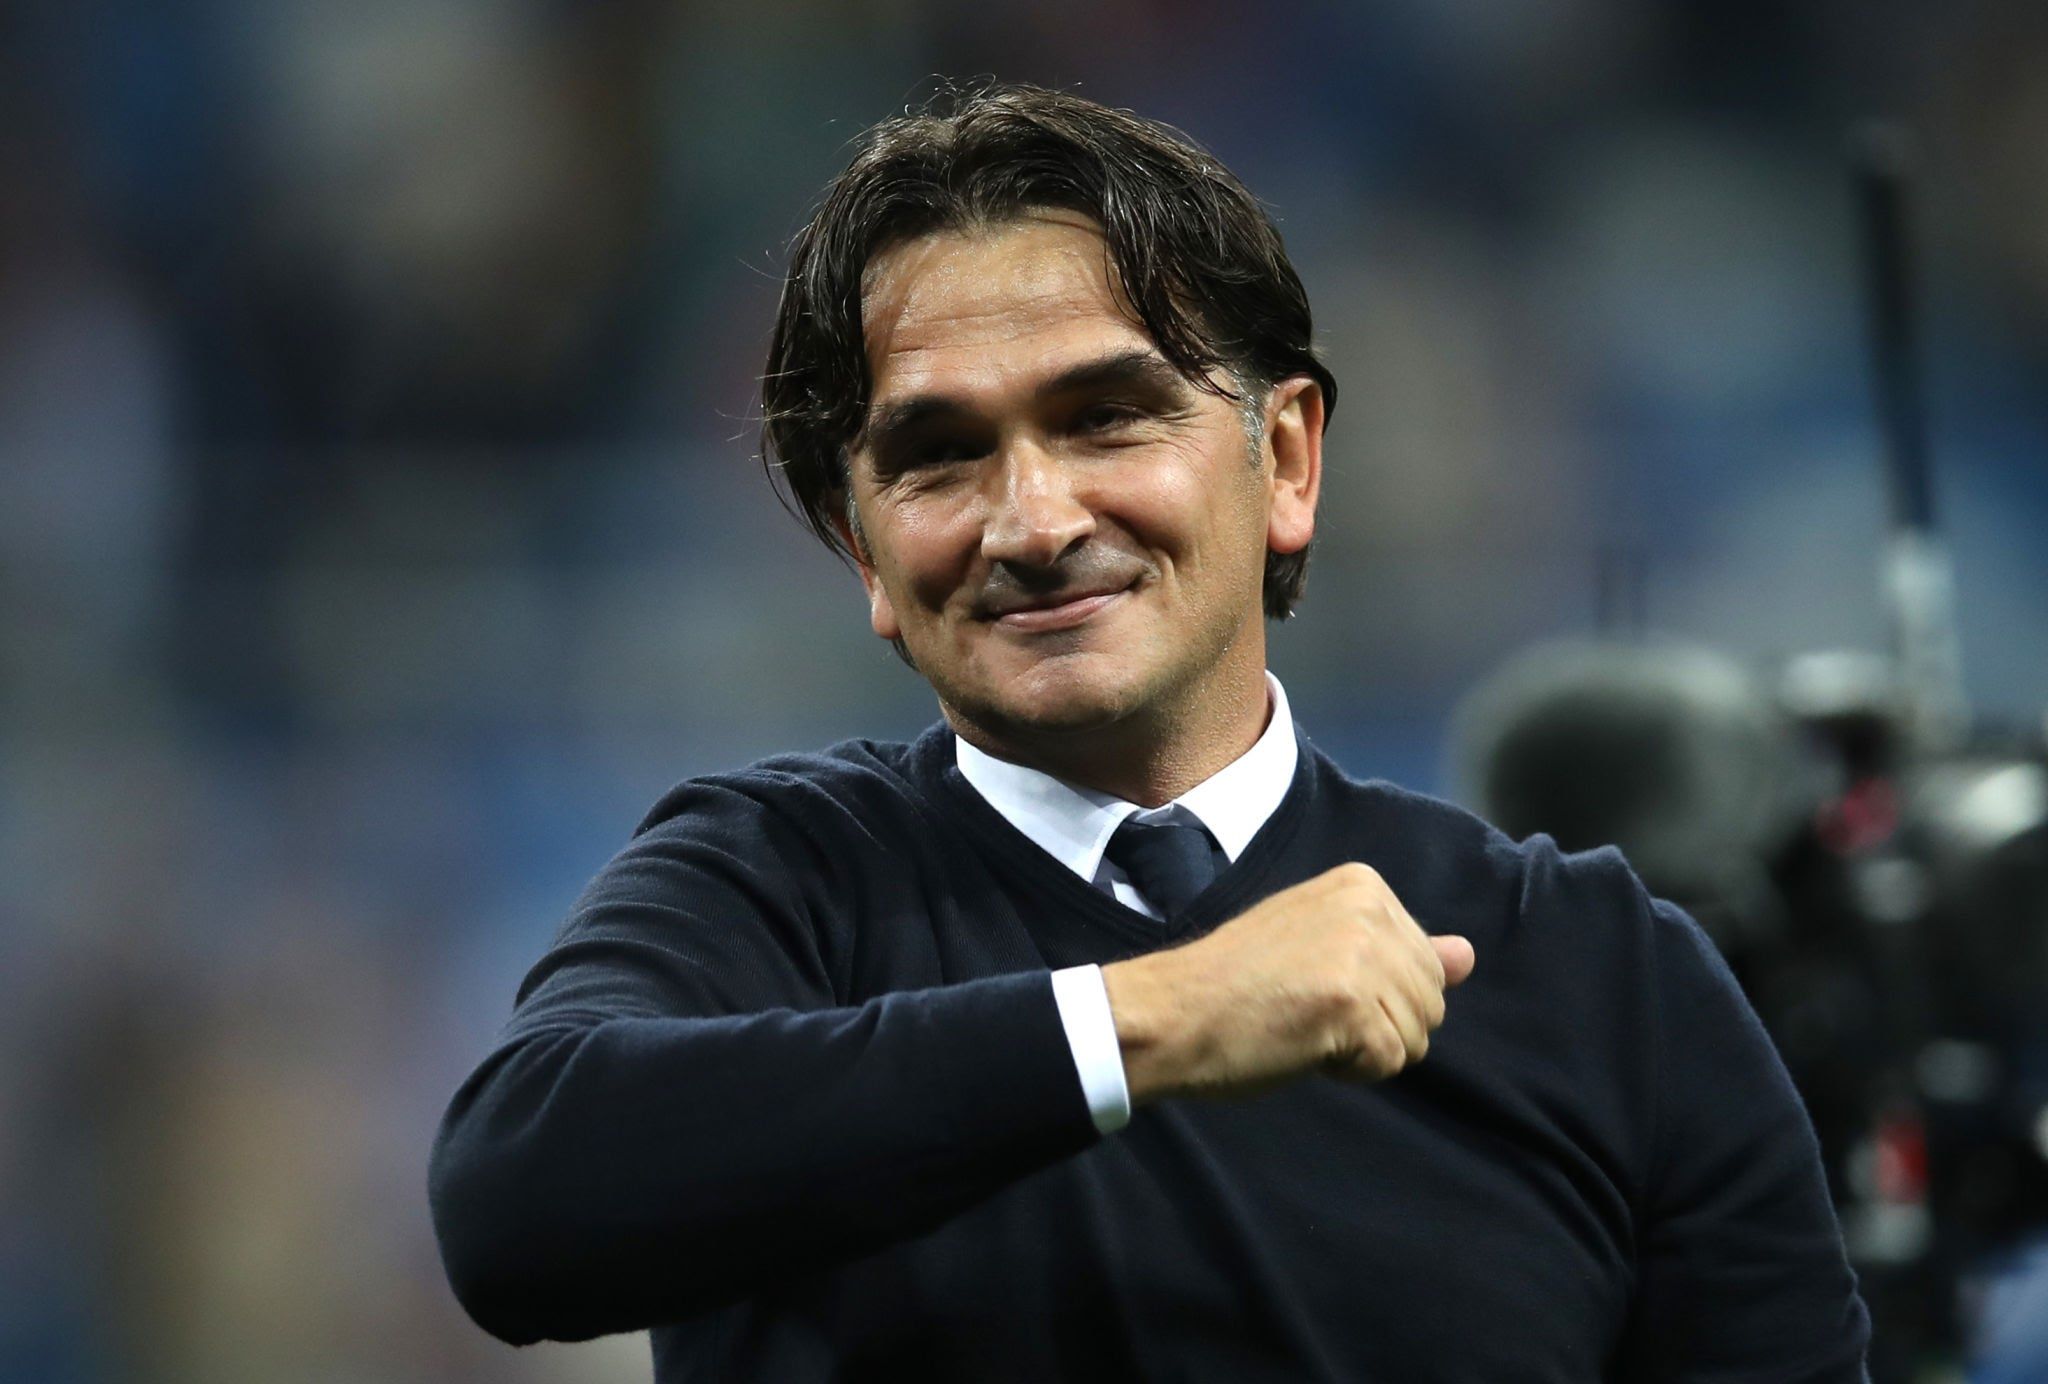 Croatian coach Dalić considers the team's performance in 2022 World Cup match against Belgium to be excellent